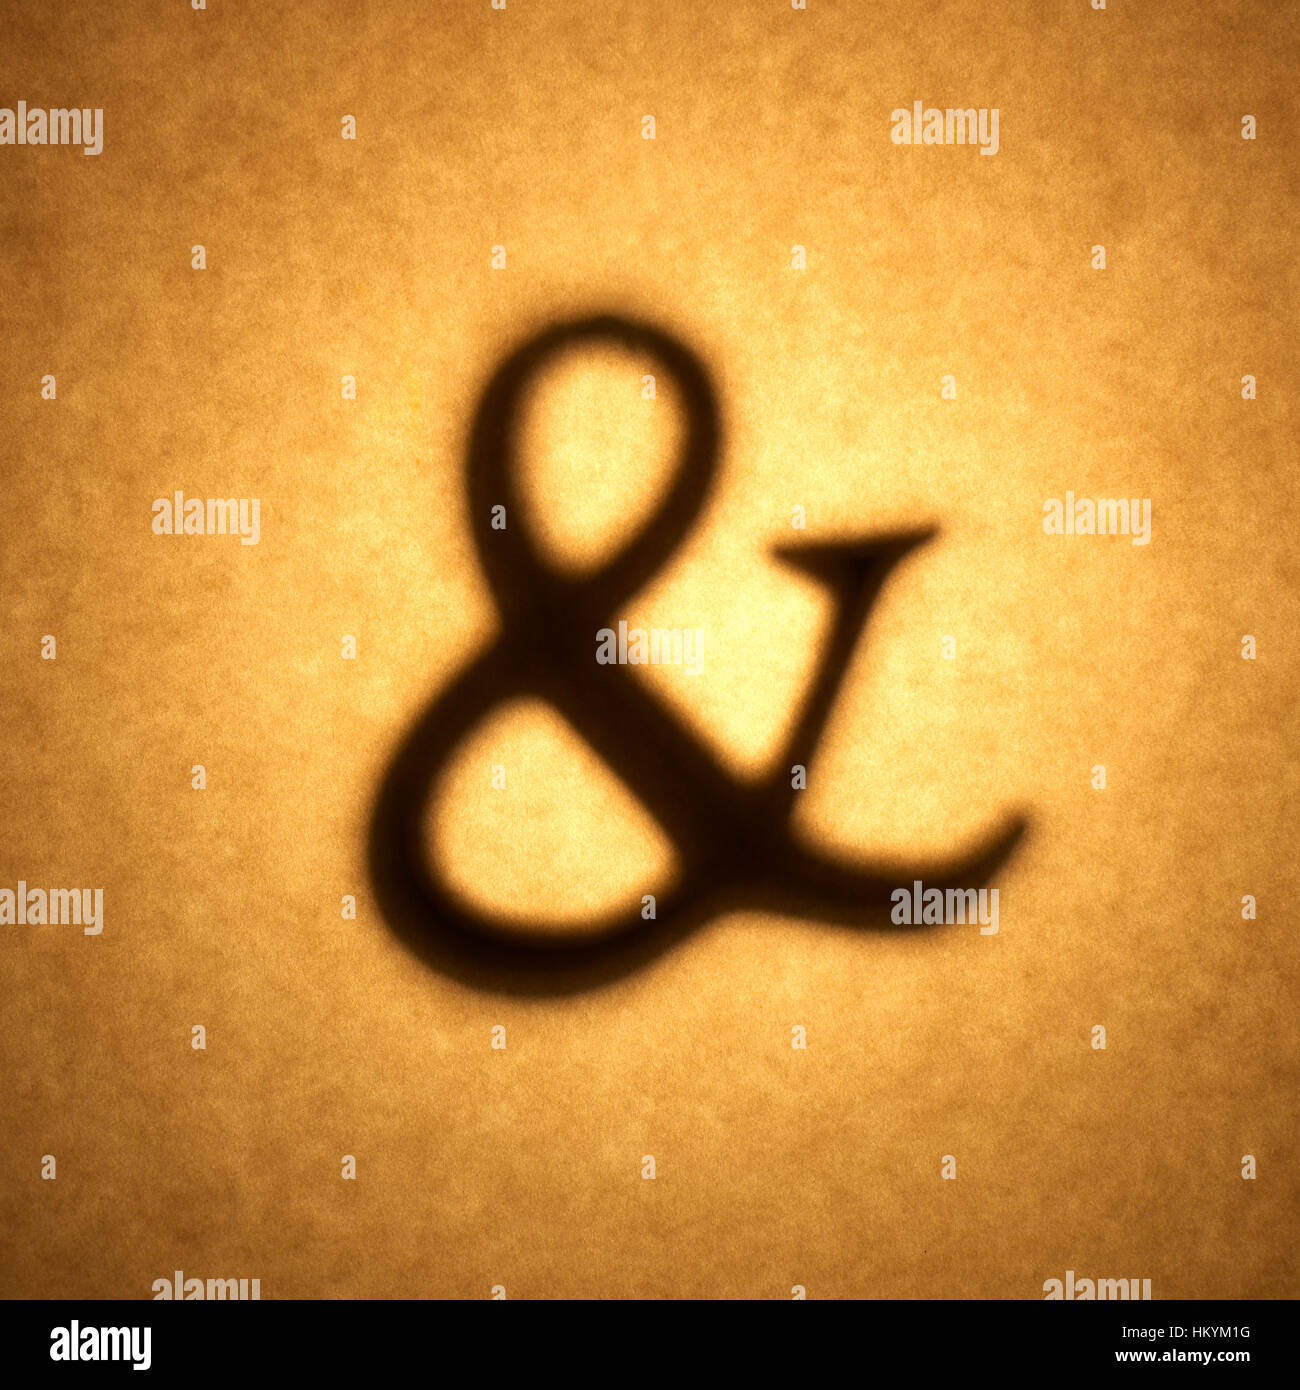 Backlit silhouette of ampersand shape cut out against brown tone paper, with spot highlight. Stock Photo